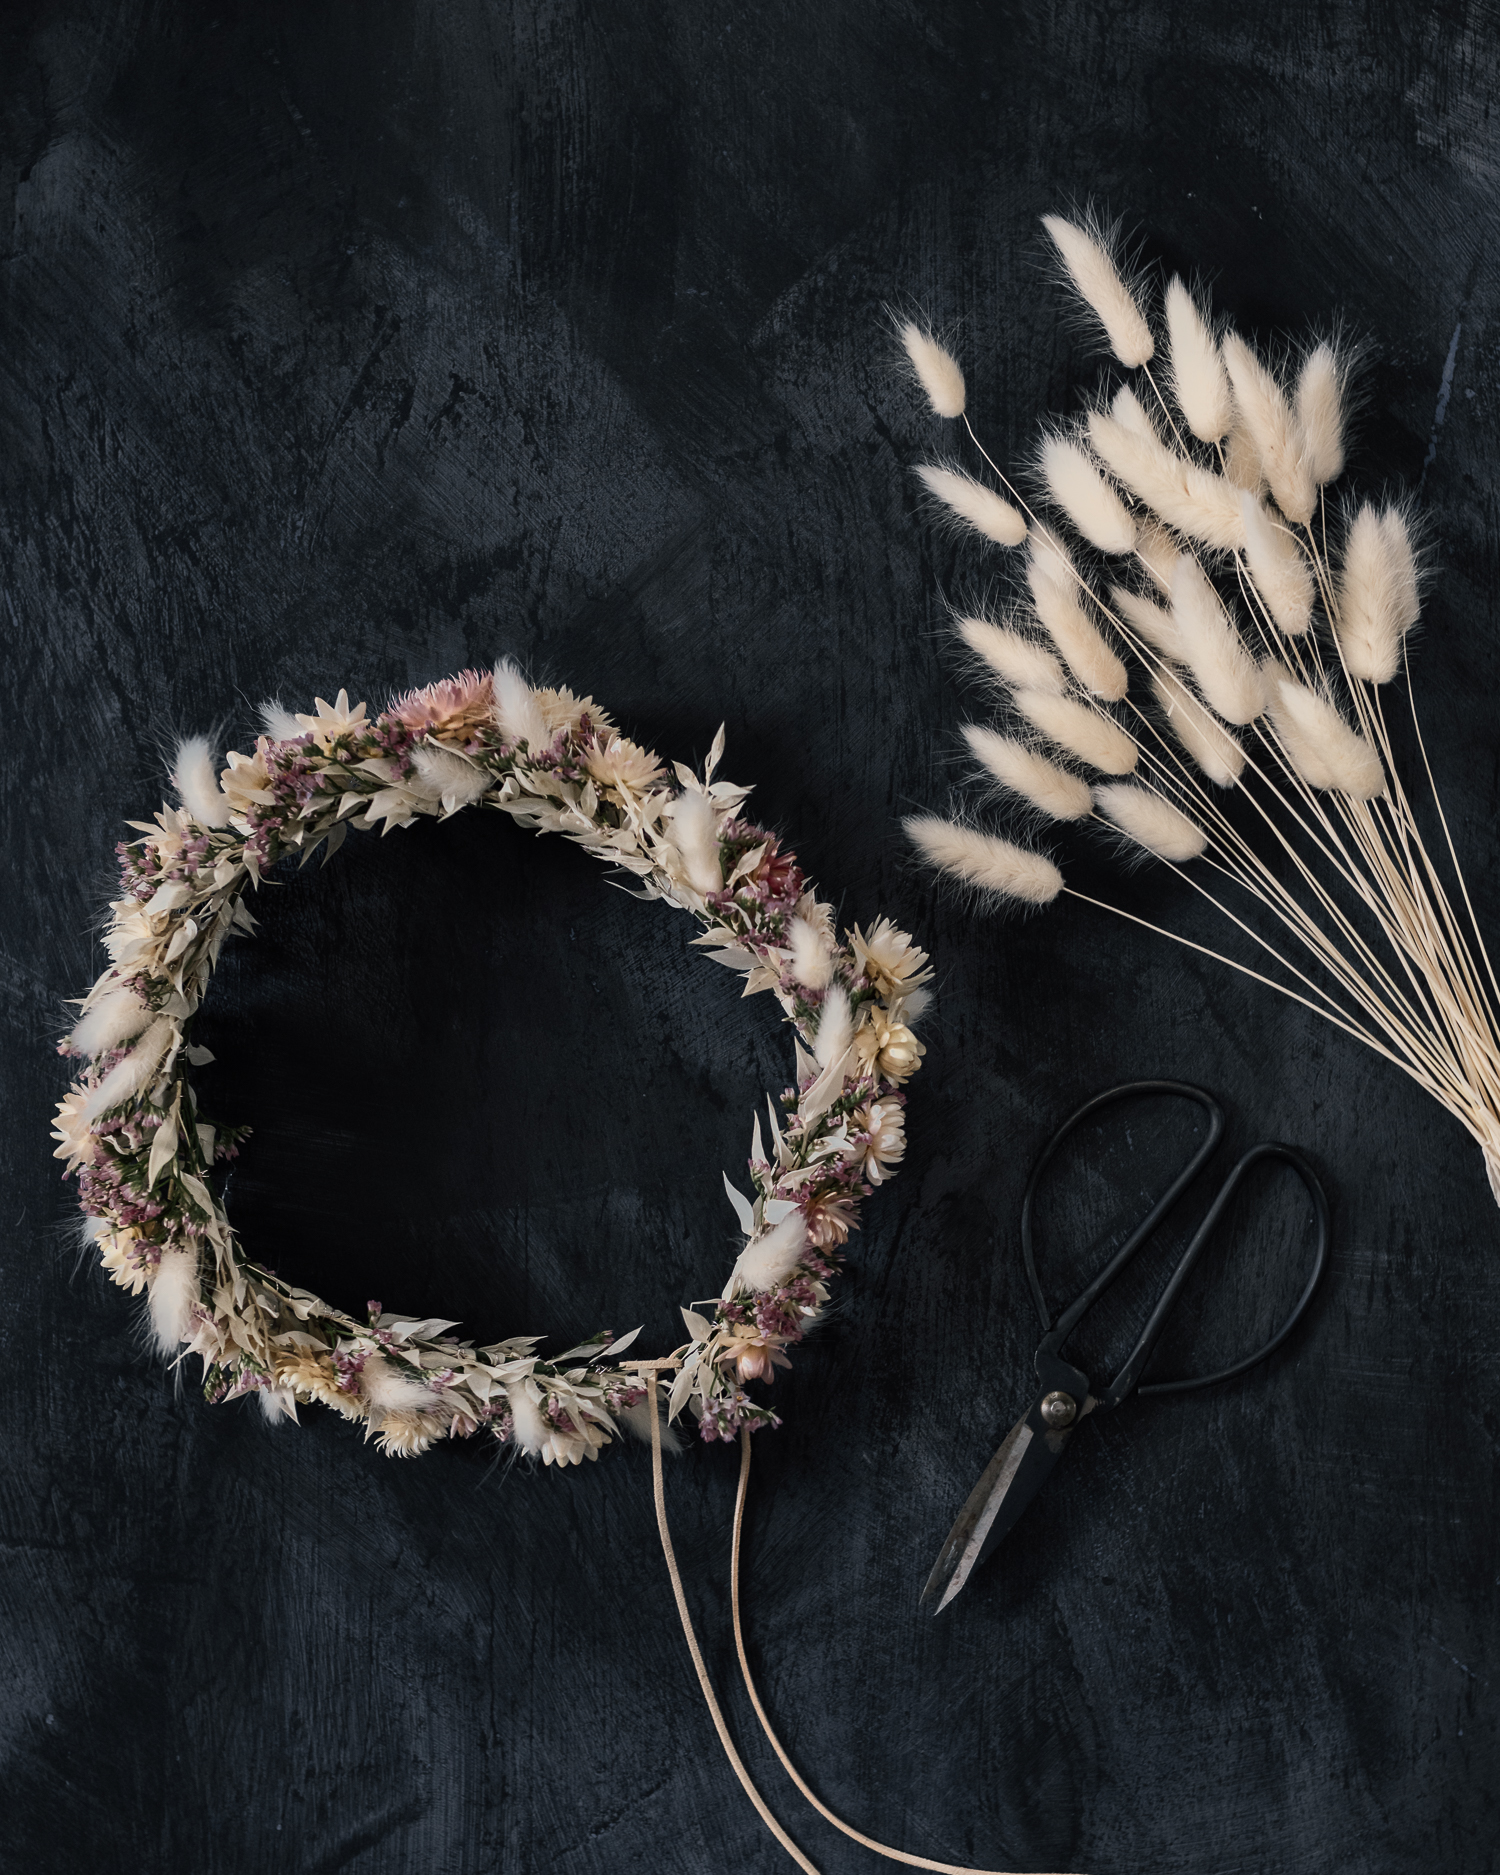 Make your own flower crown